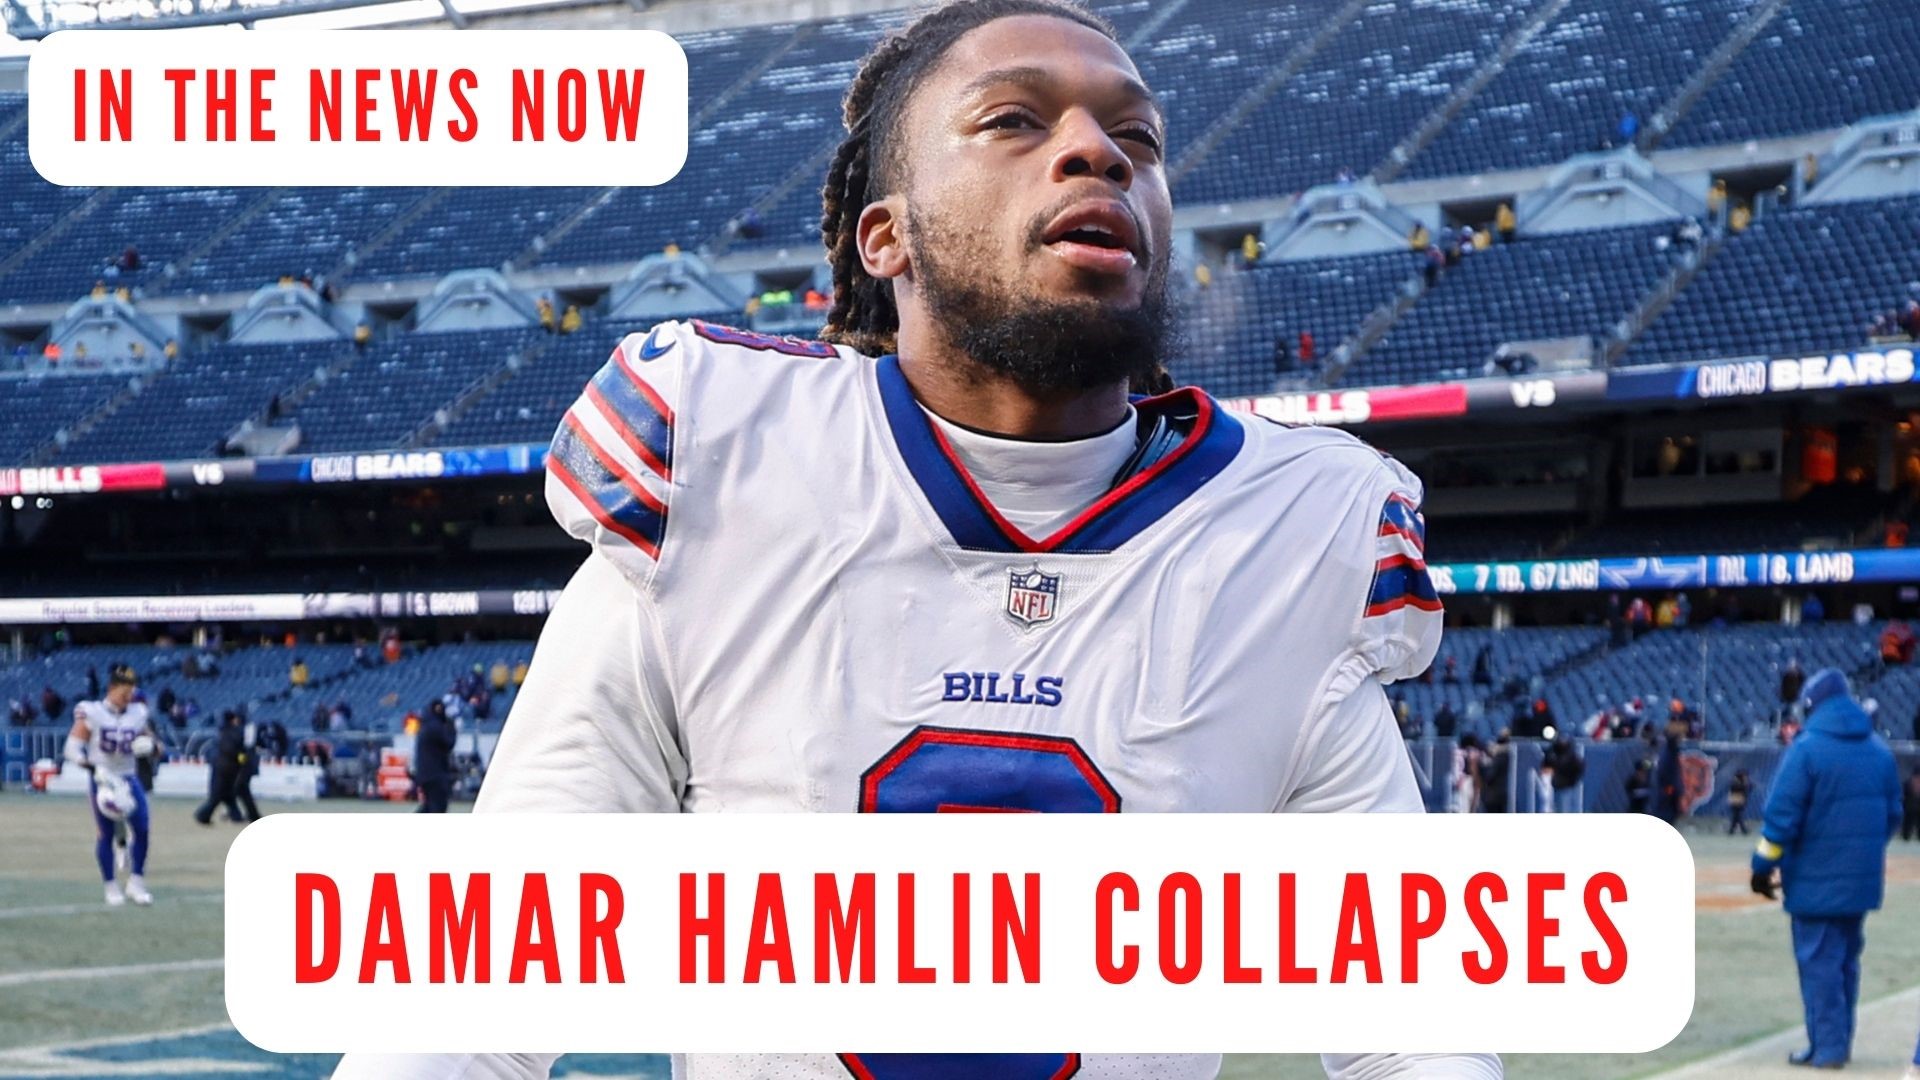 The latest information on Damar Hamlin after he collapsed on the field while playing the Bengals, and is now in the hospital in critical condition.